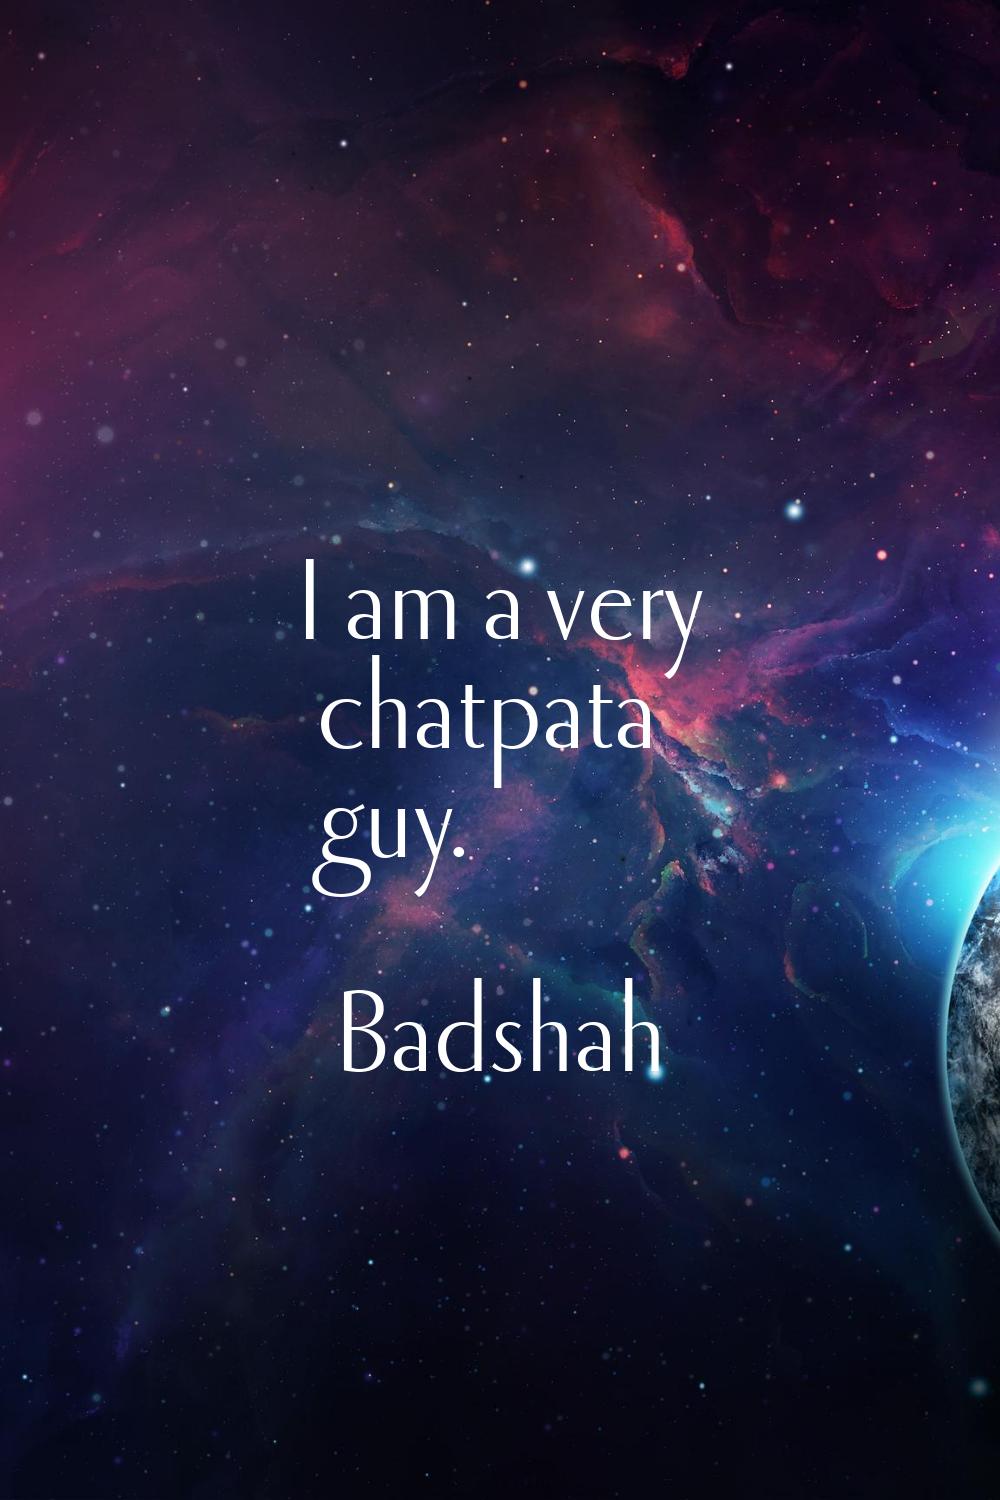 I am a very chatpata guy.